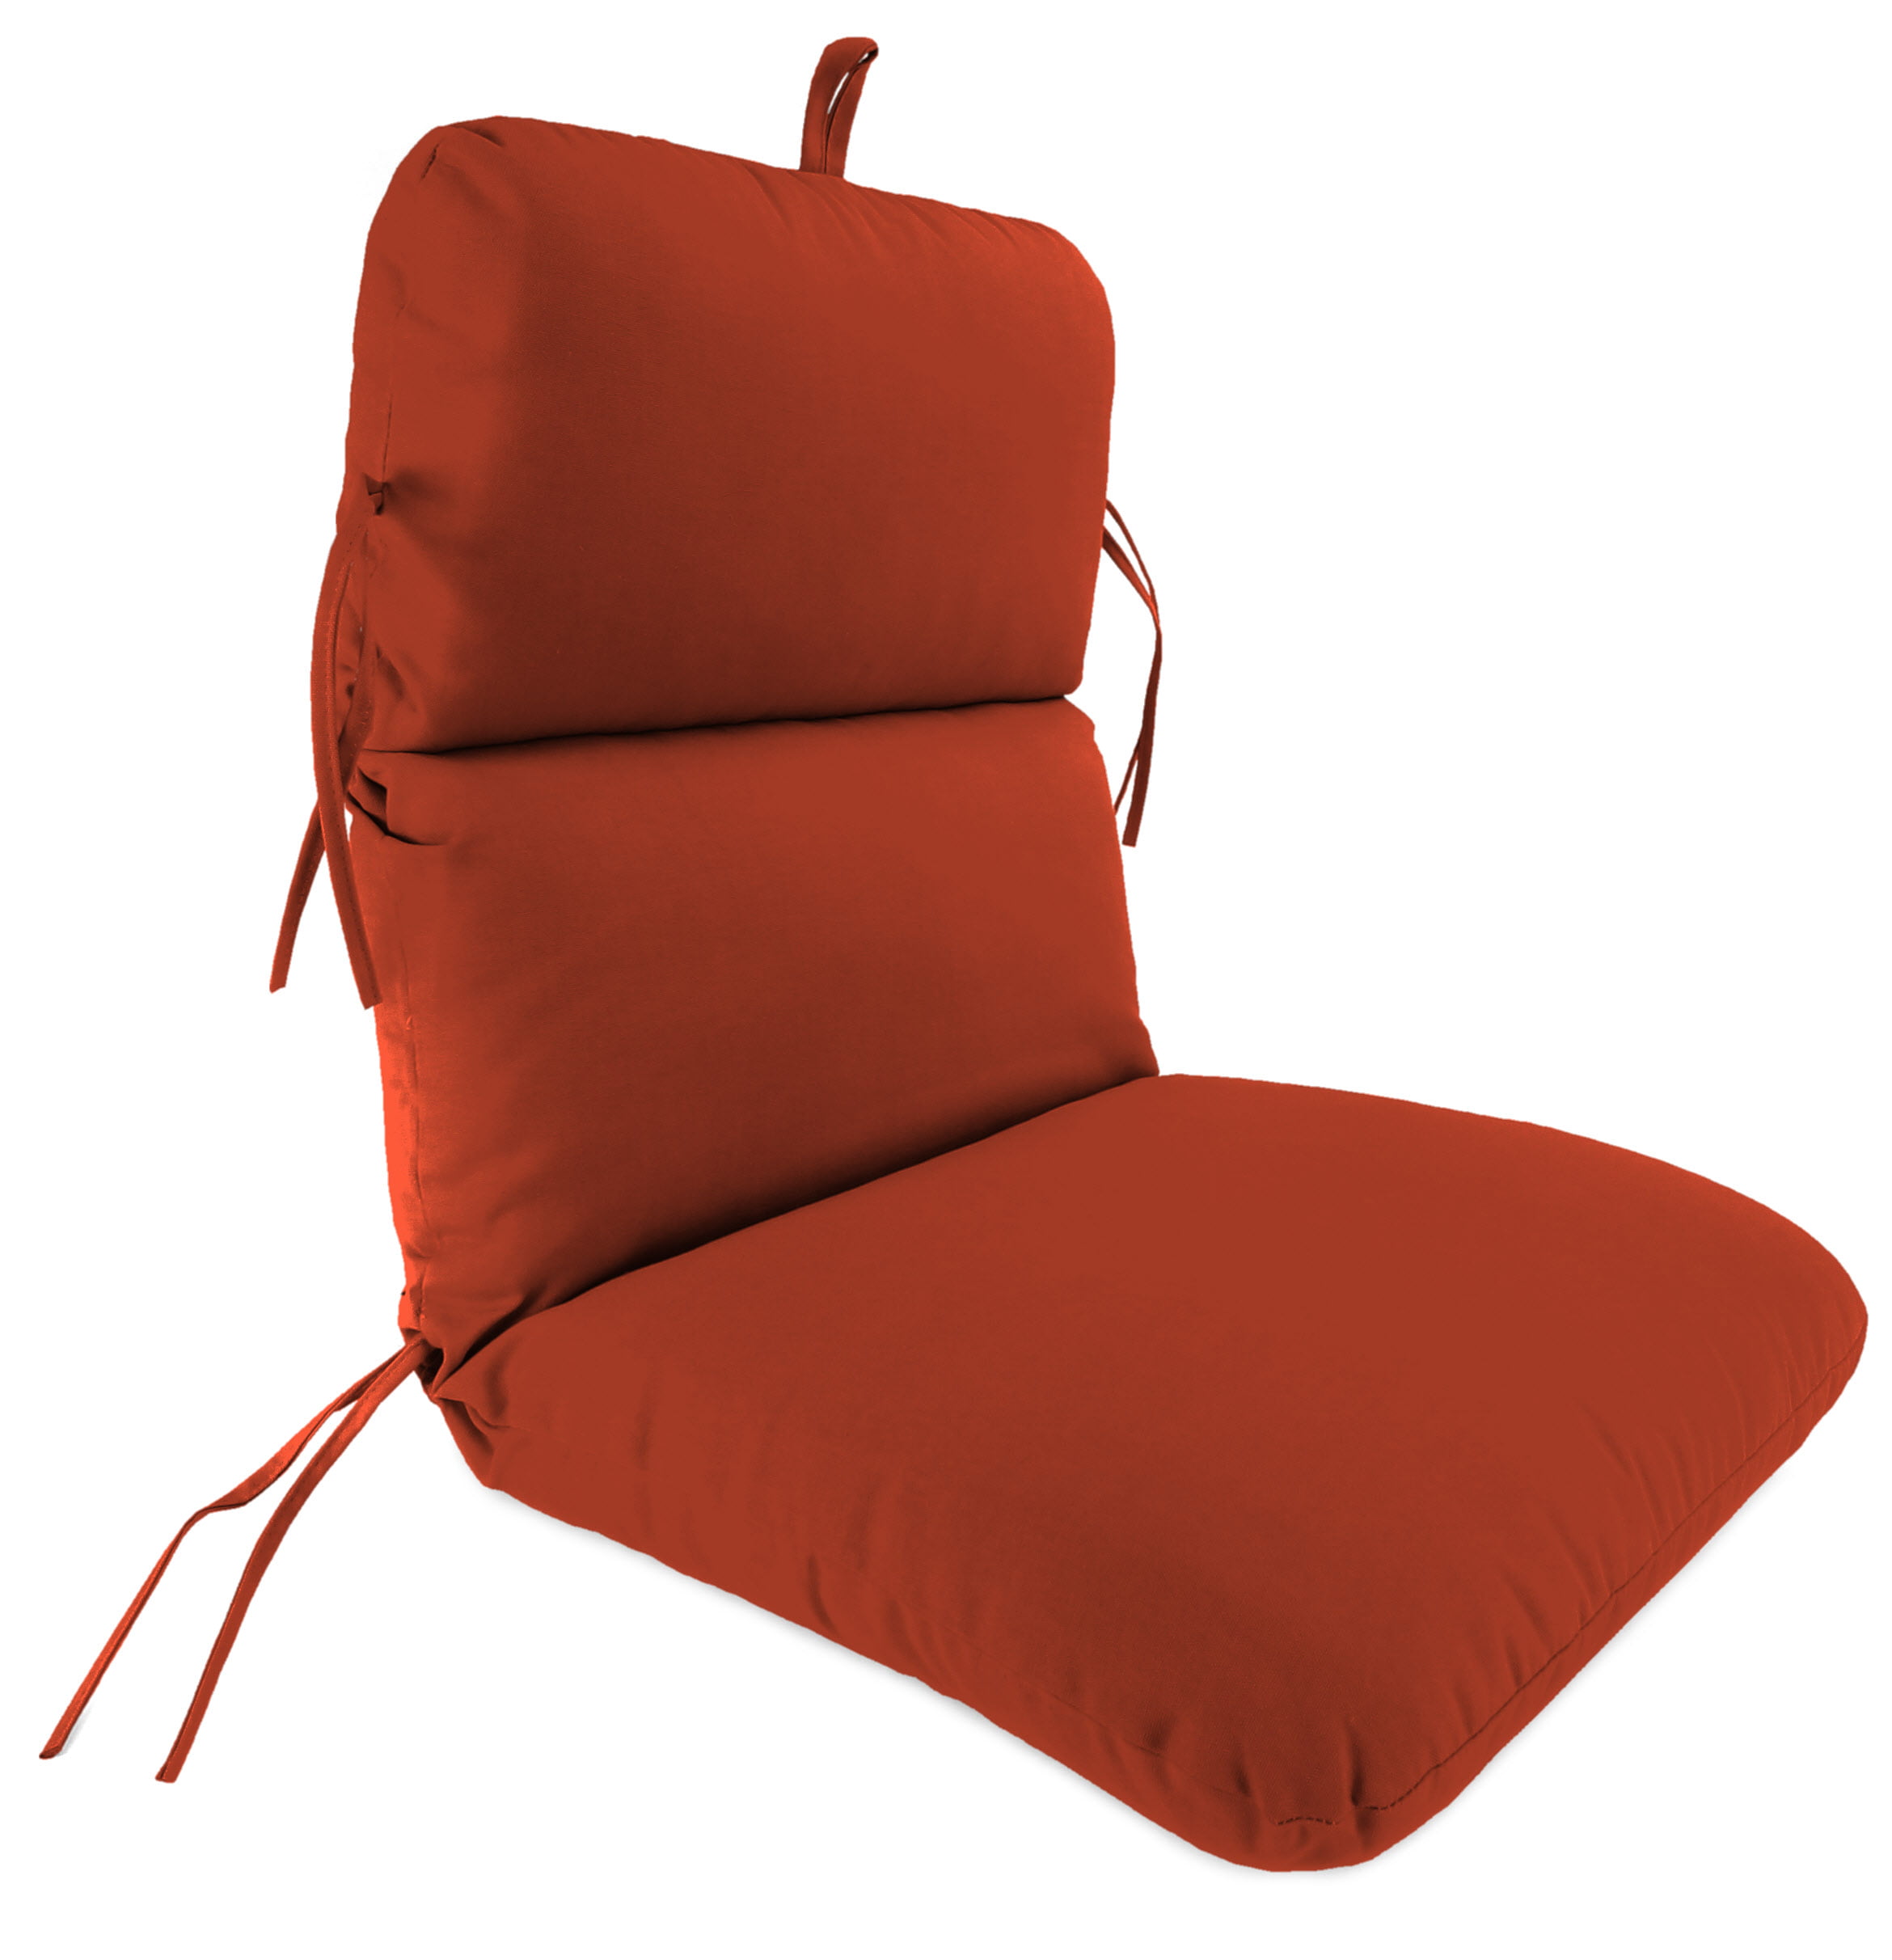 Sunbrella 22' x 45" Red Rectangle Chair Outdoor Seating Cushion